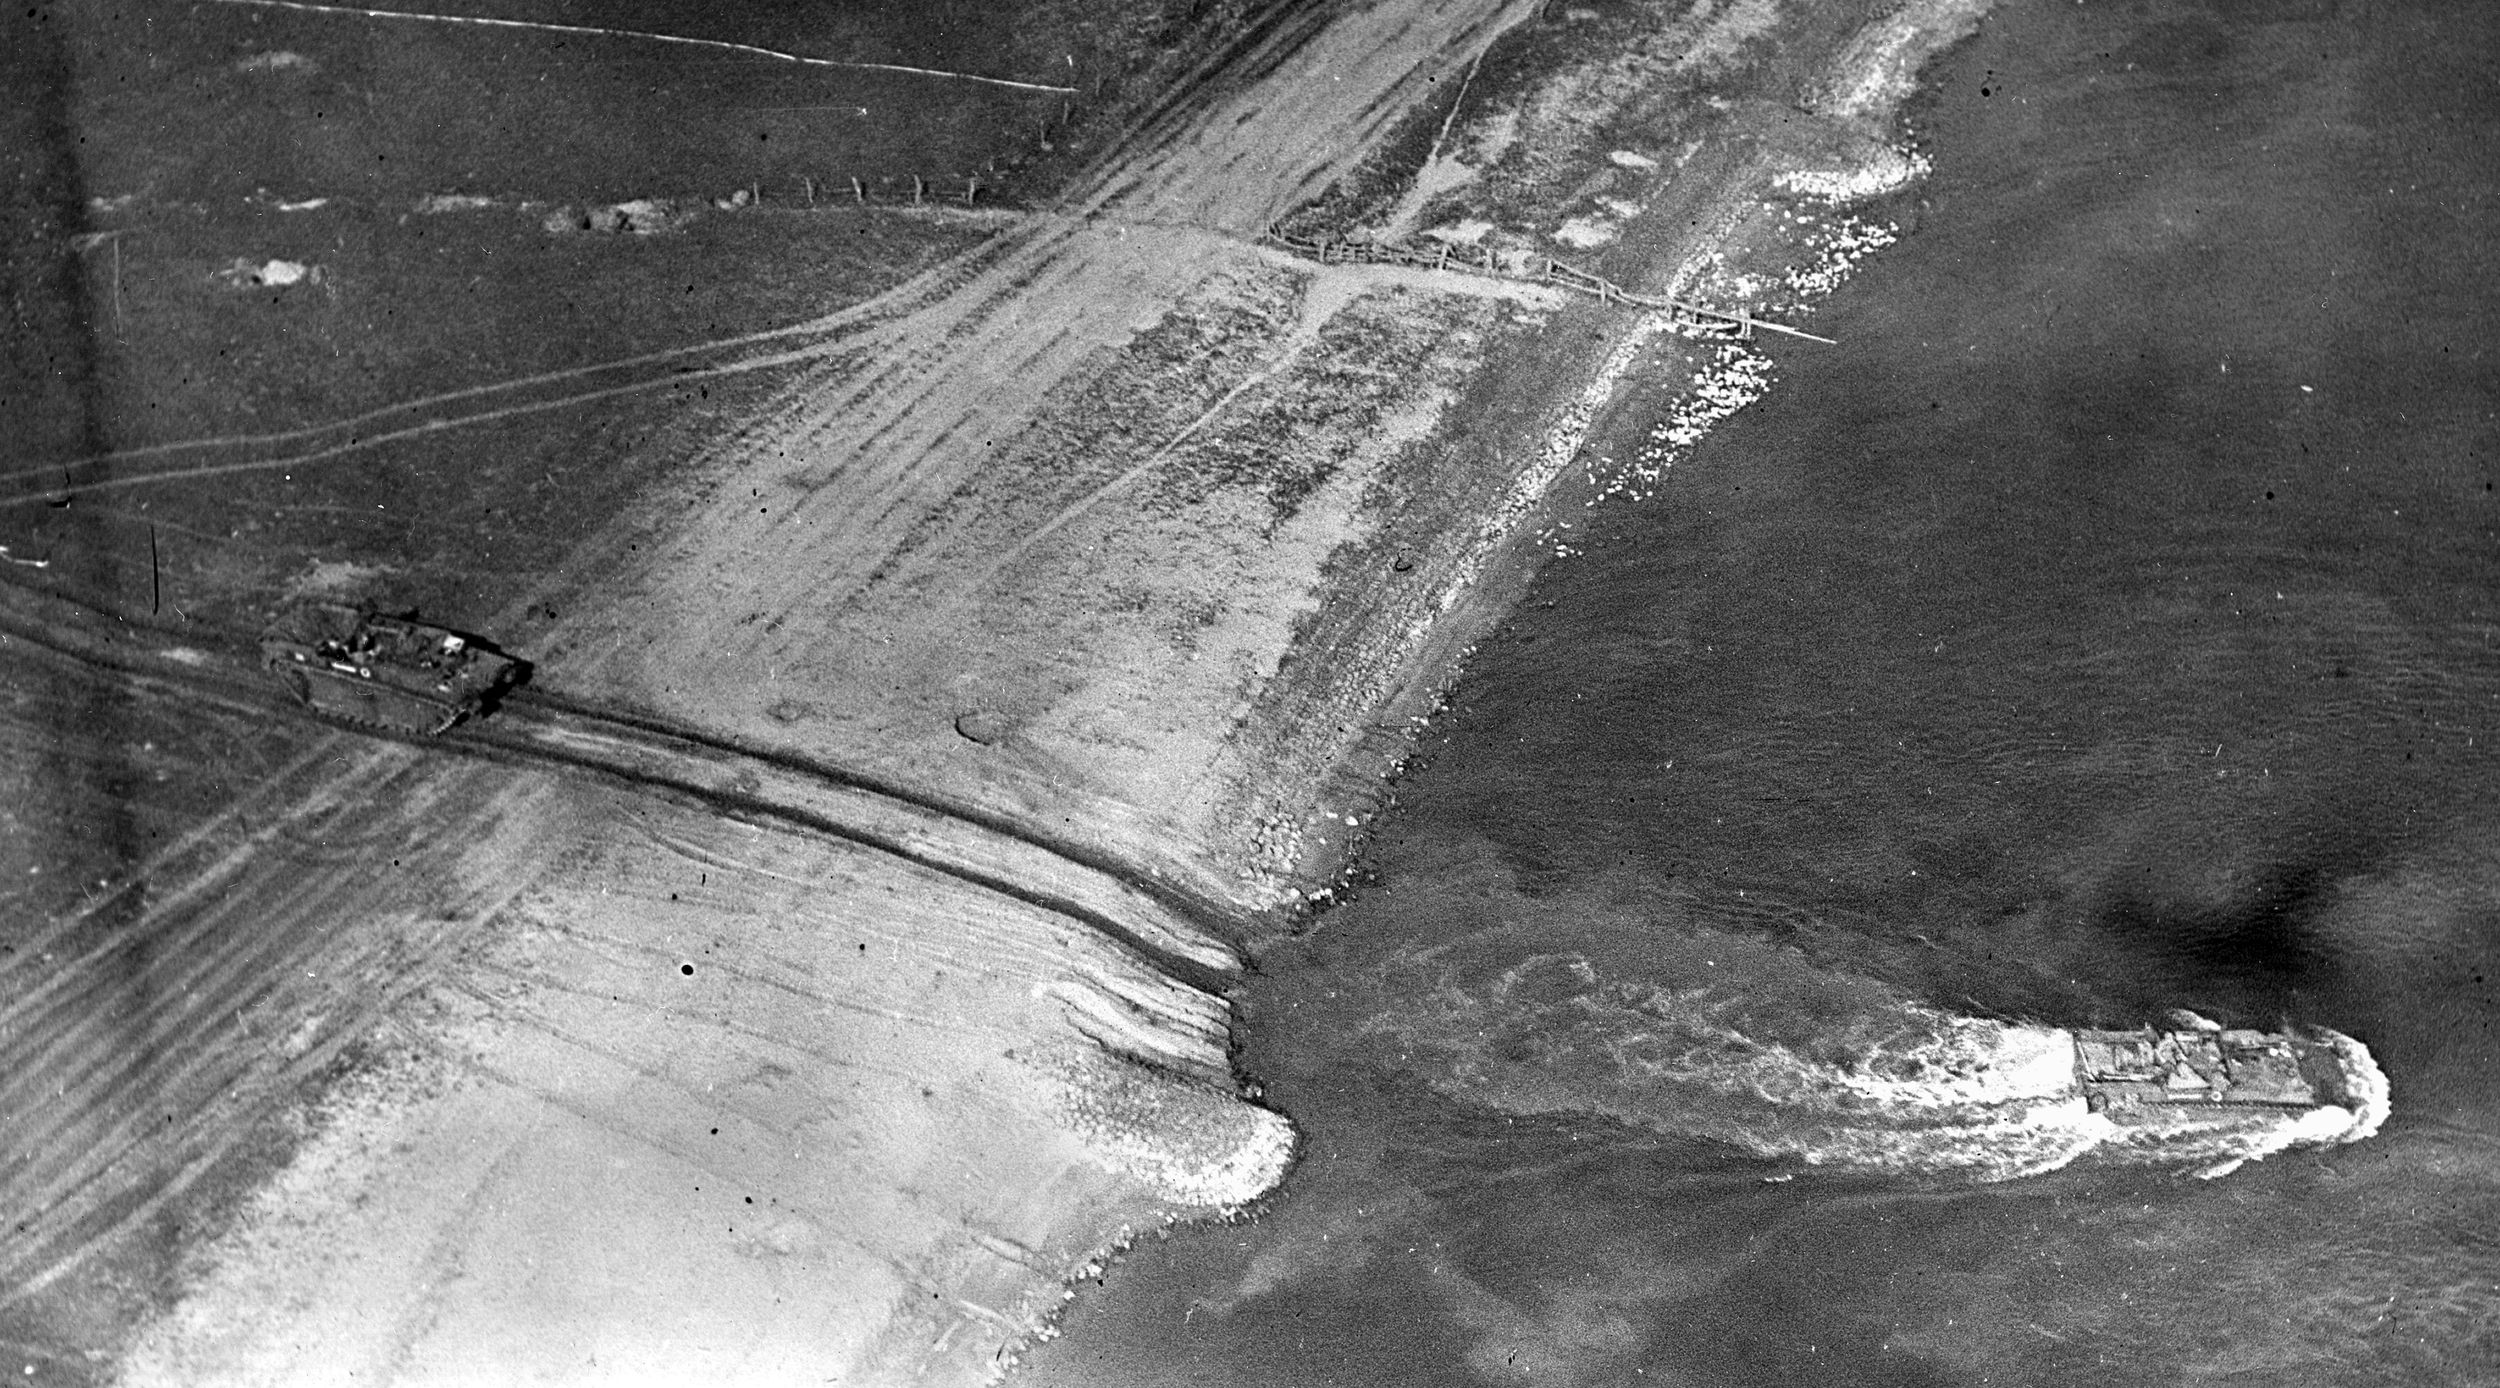 A British amphibious armored vehicle leaves the west bank of the Rhine, headed eastward. Another tank can be seen behind it on the bank. The photo was taken from a low-flying RAF plane on March 24, 1945.